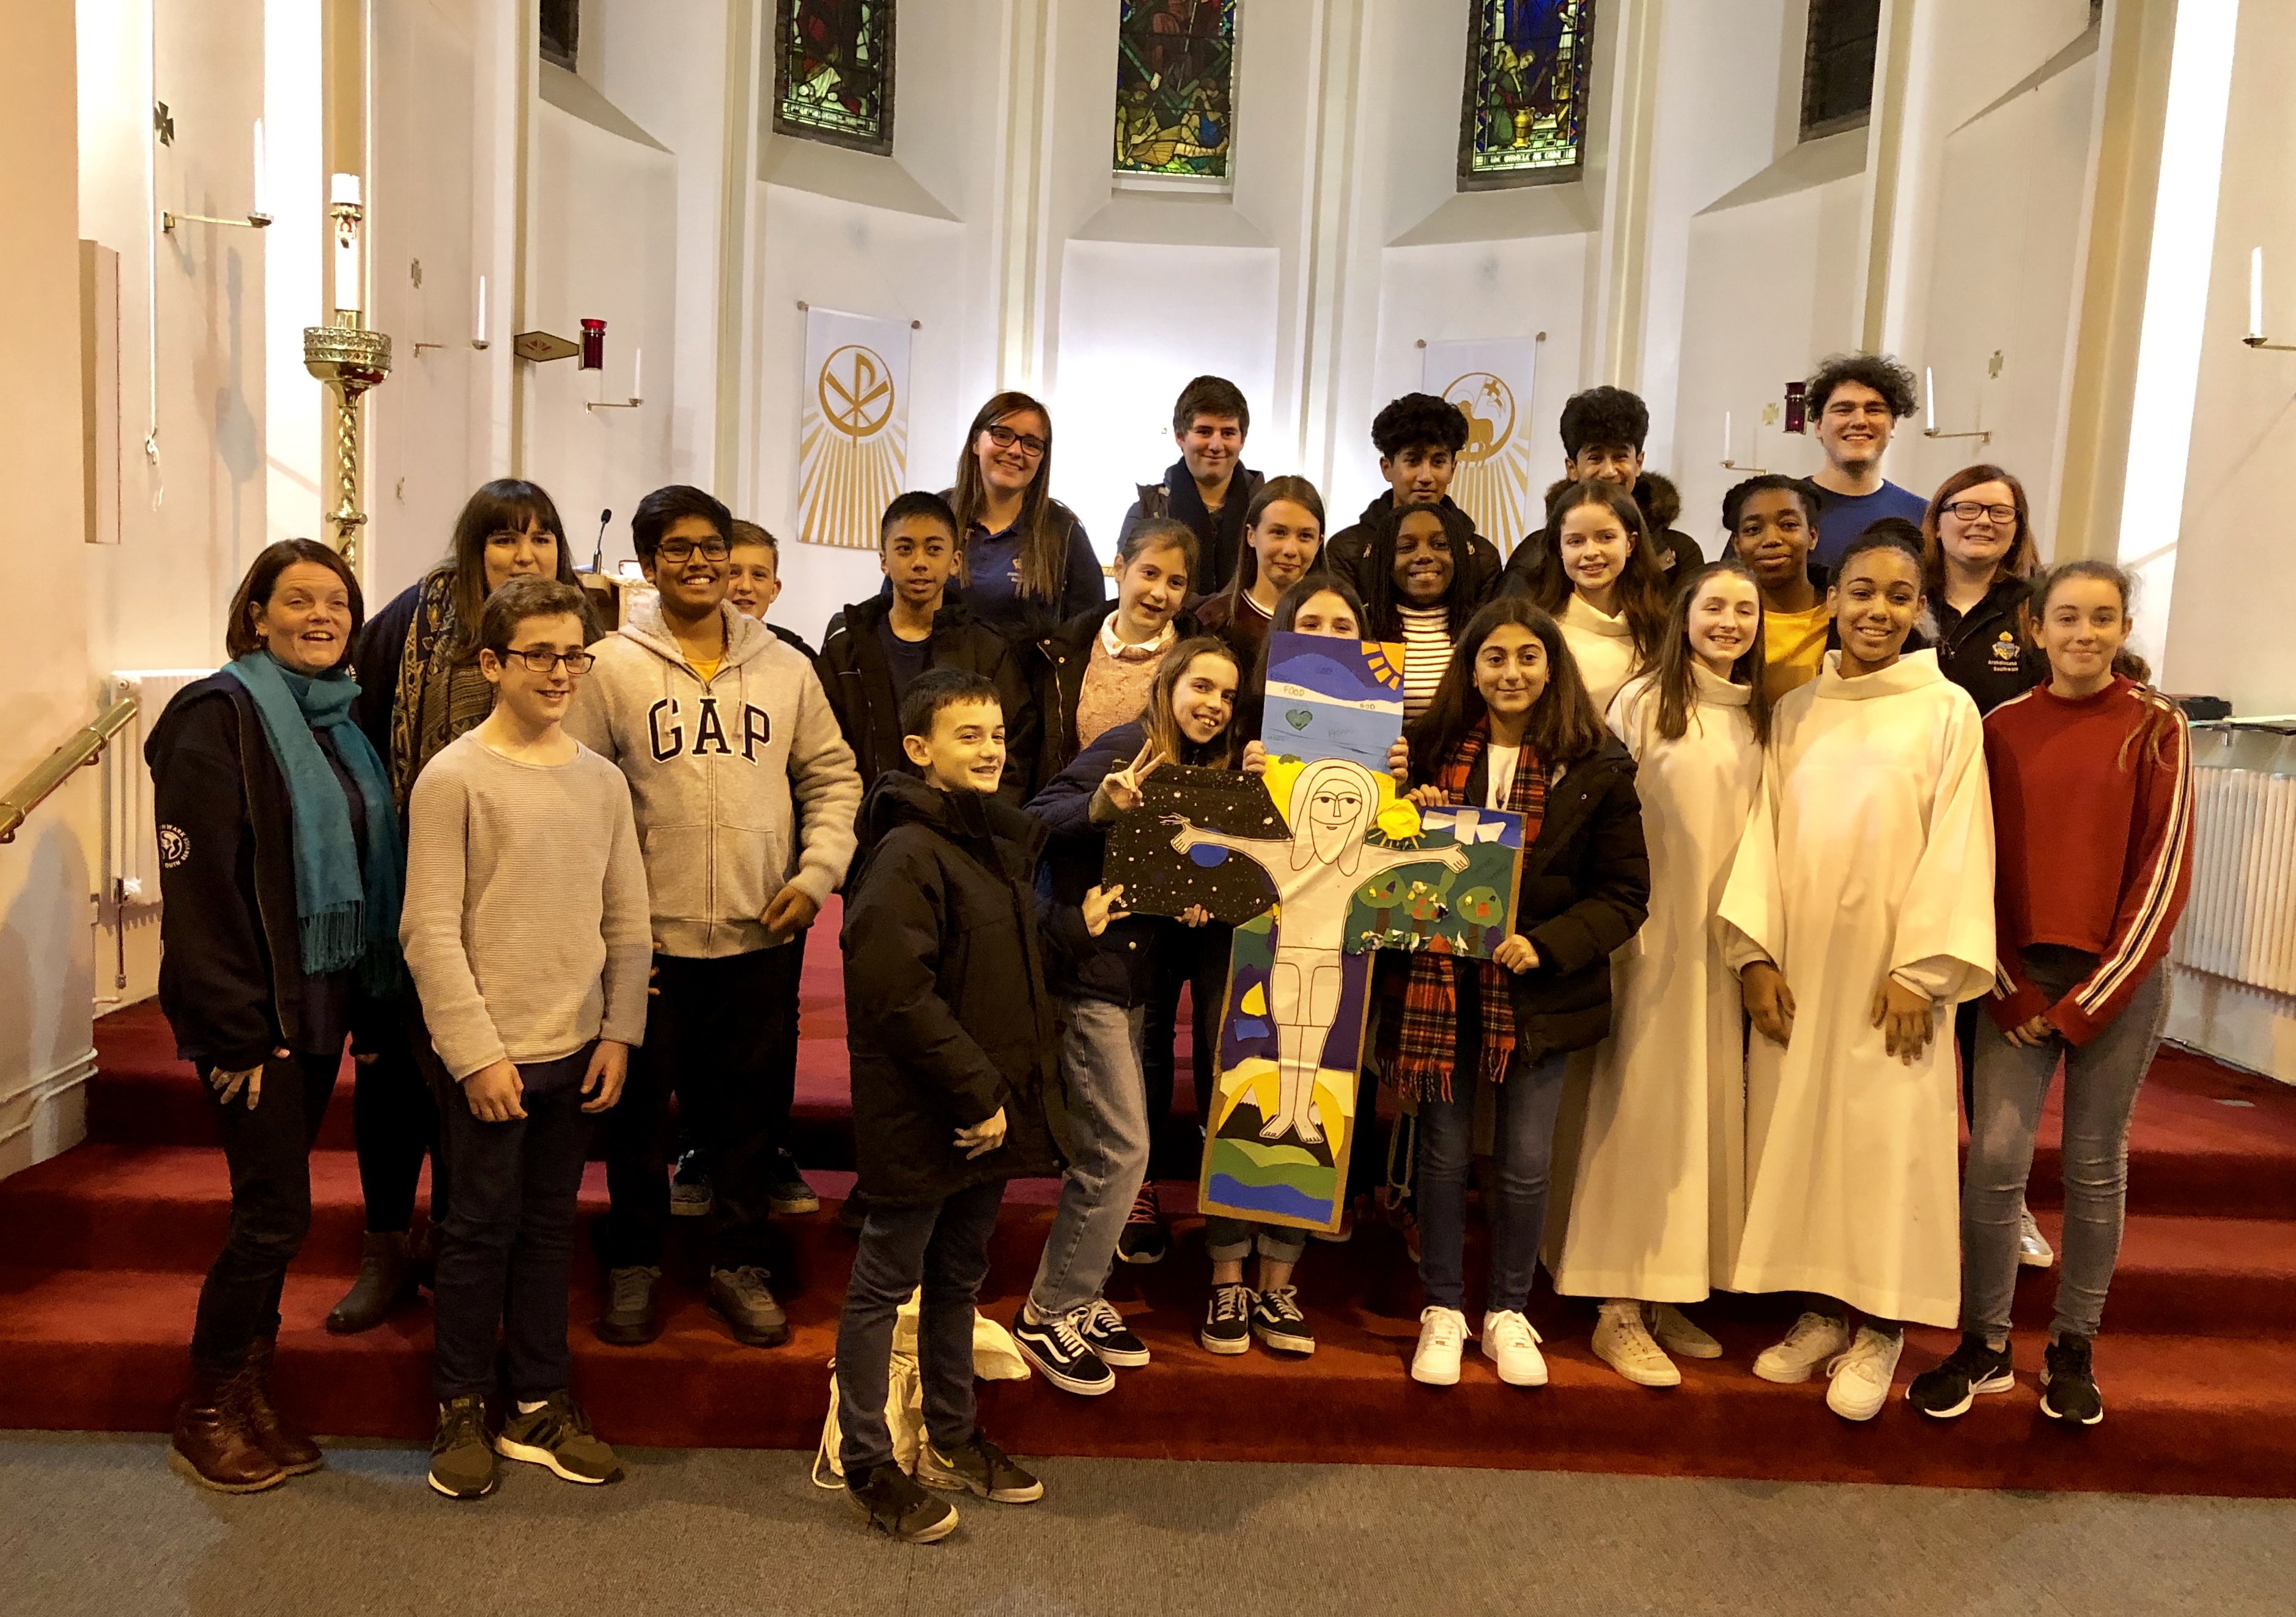 Christ the King Youth Day – St Joseph's and St Swithun's Parish, Bromley